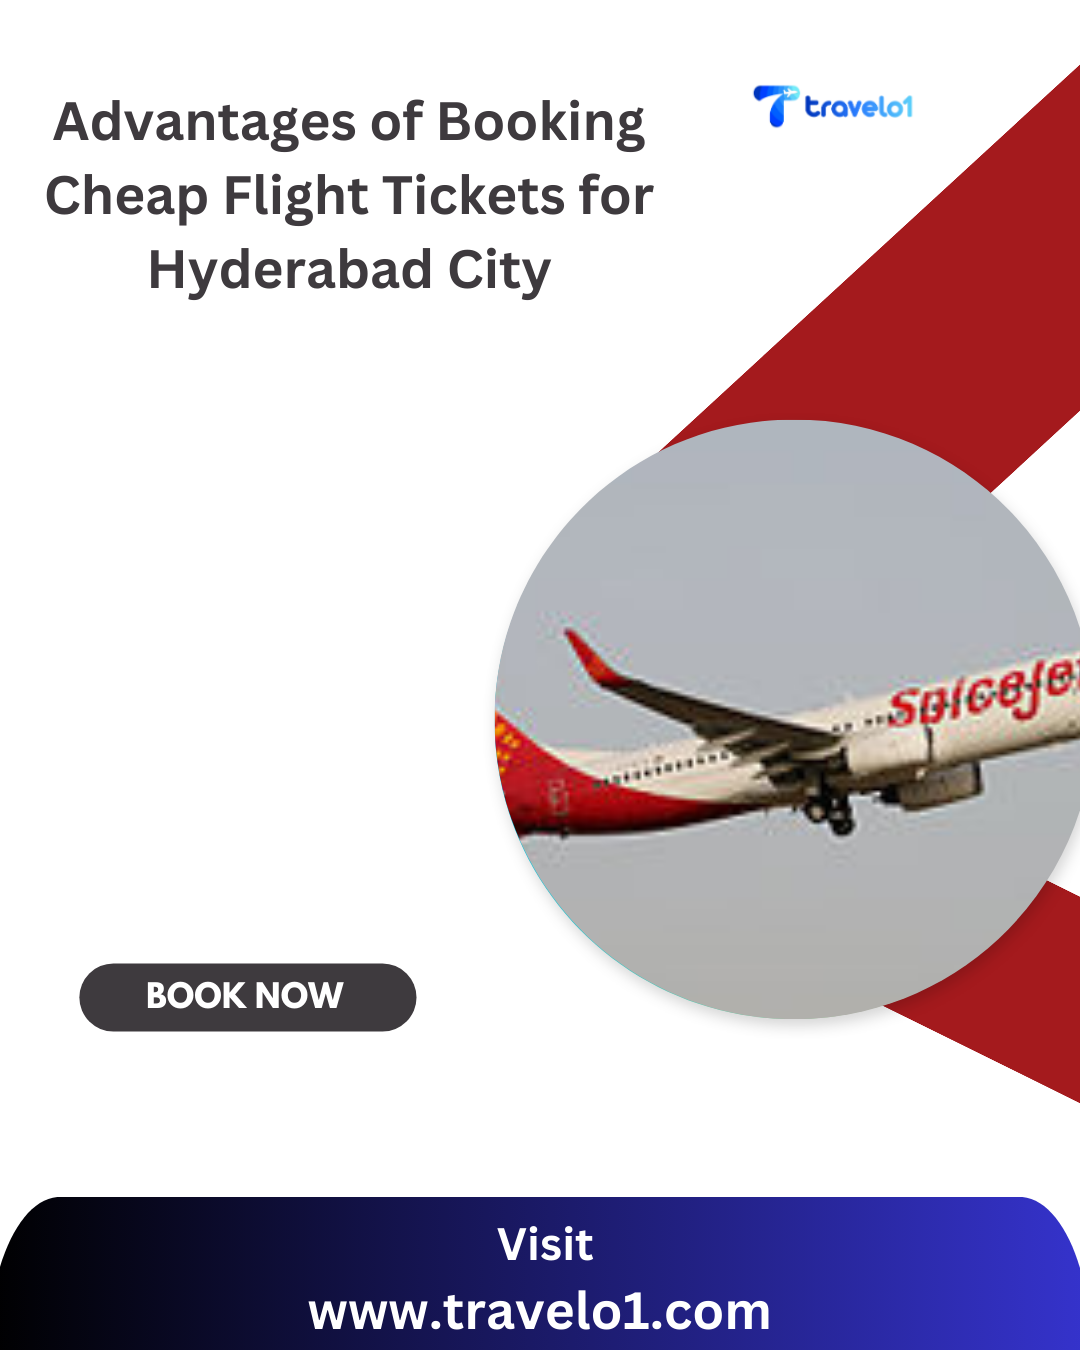 Advantages of Booking Cheap Flight Tickets for Hyderabad City - Hyderabad Other